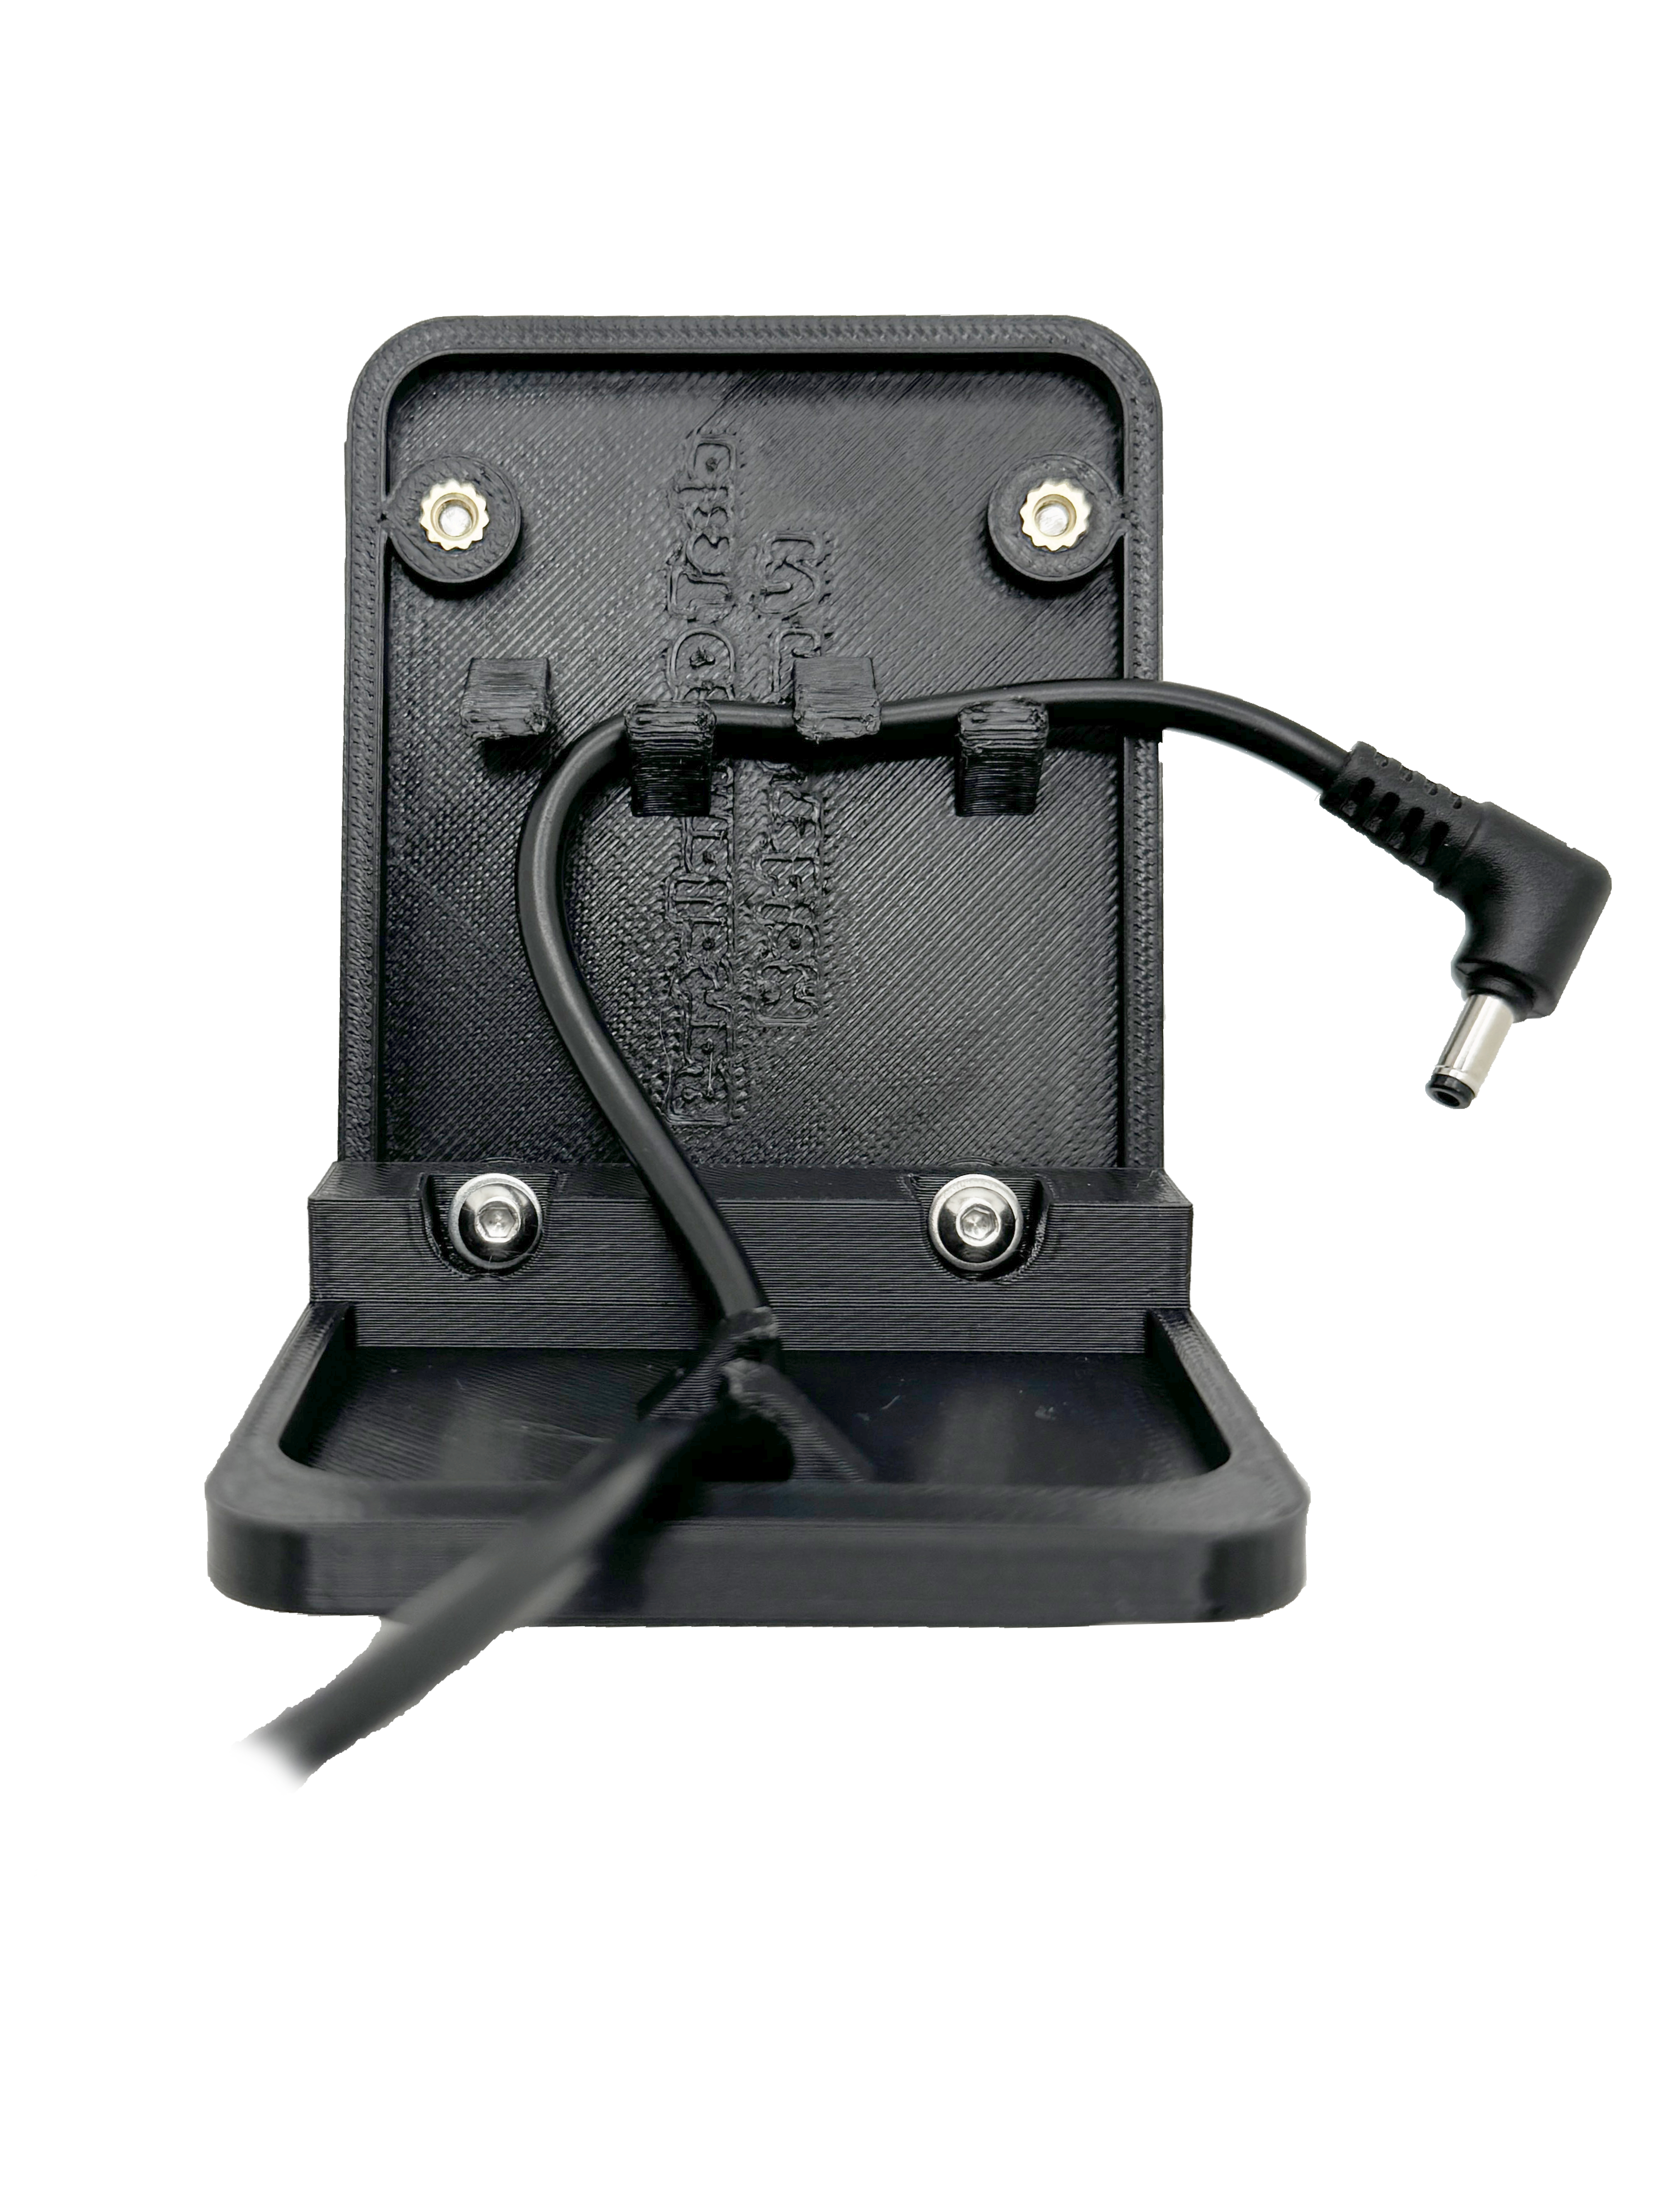 Image of the bottom of the unit showing cable clips with a cable routed through them